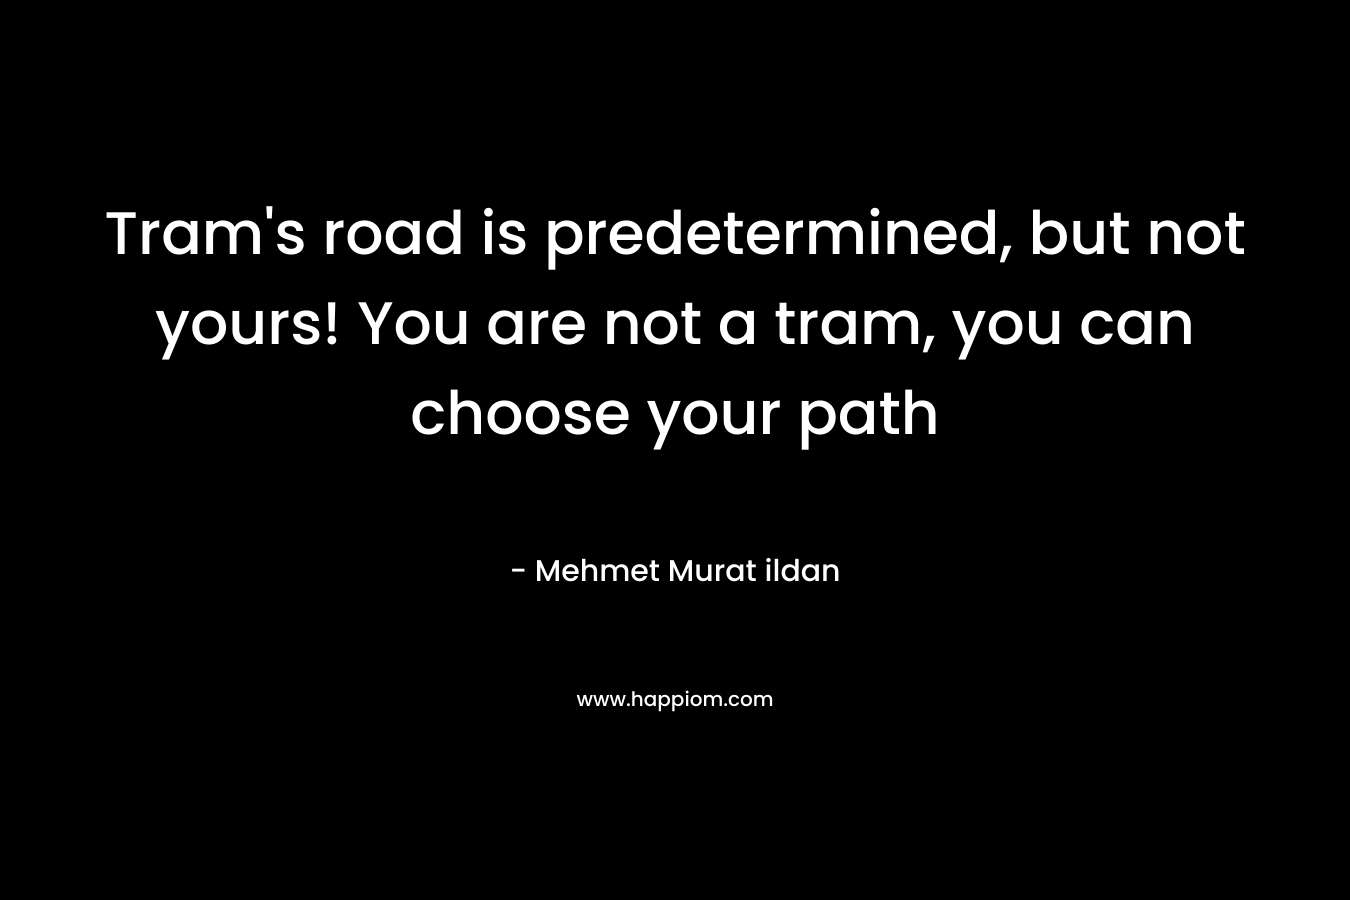 Tram's road is predetermined, but not yours! You are not a tram, you can choose your path